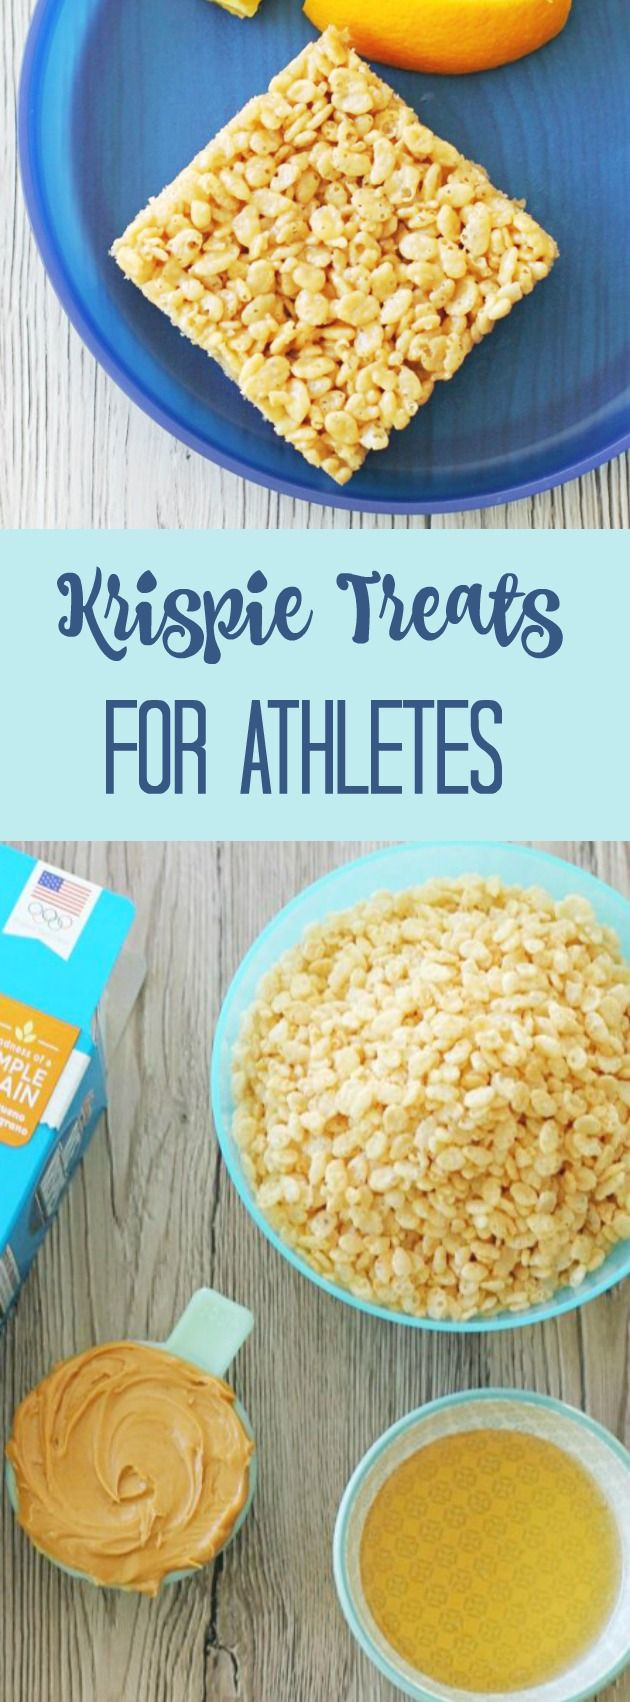 Healthy Snacks For Athletes
 Krispie Treats for Athletes Recipe